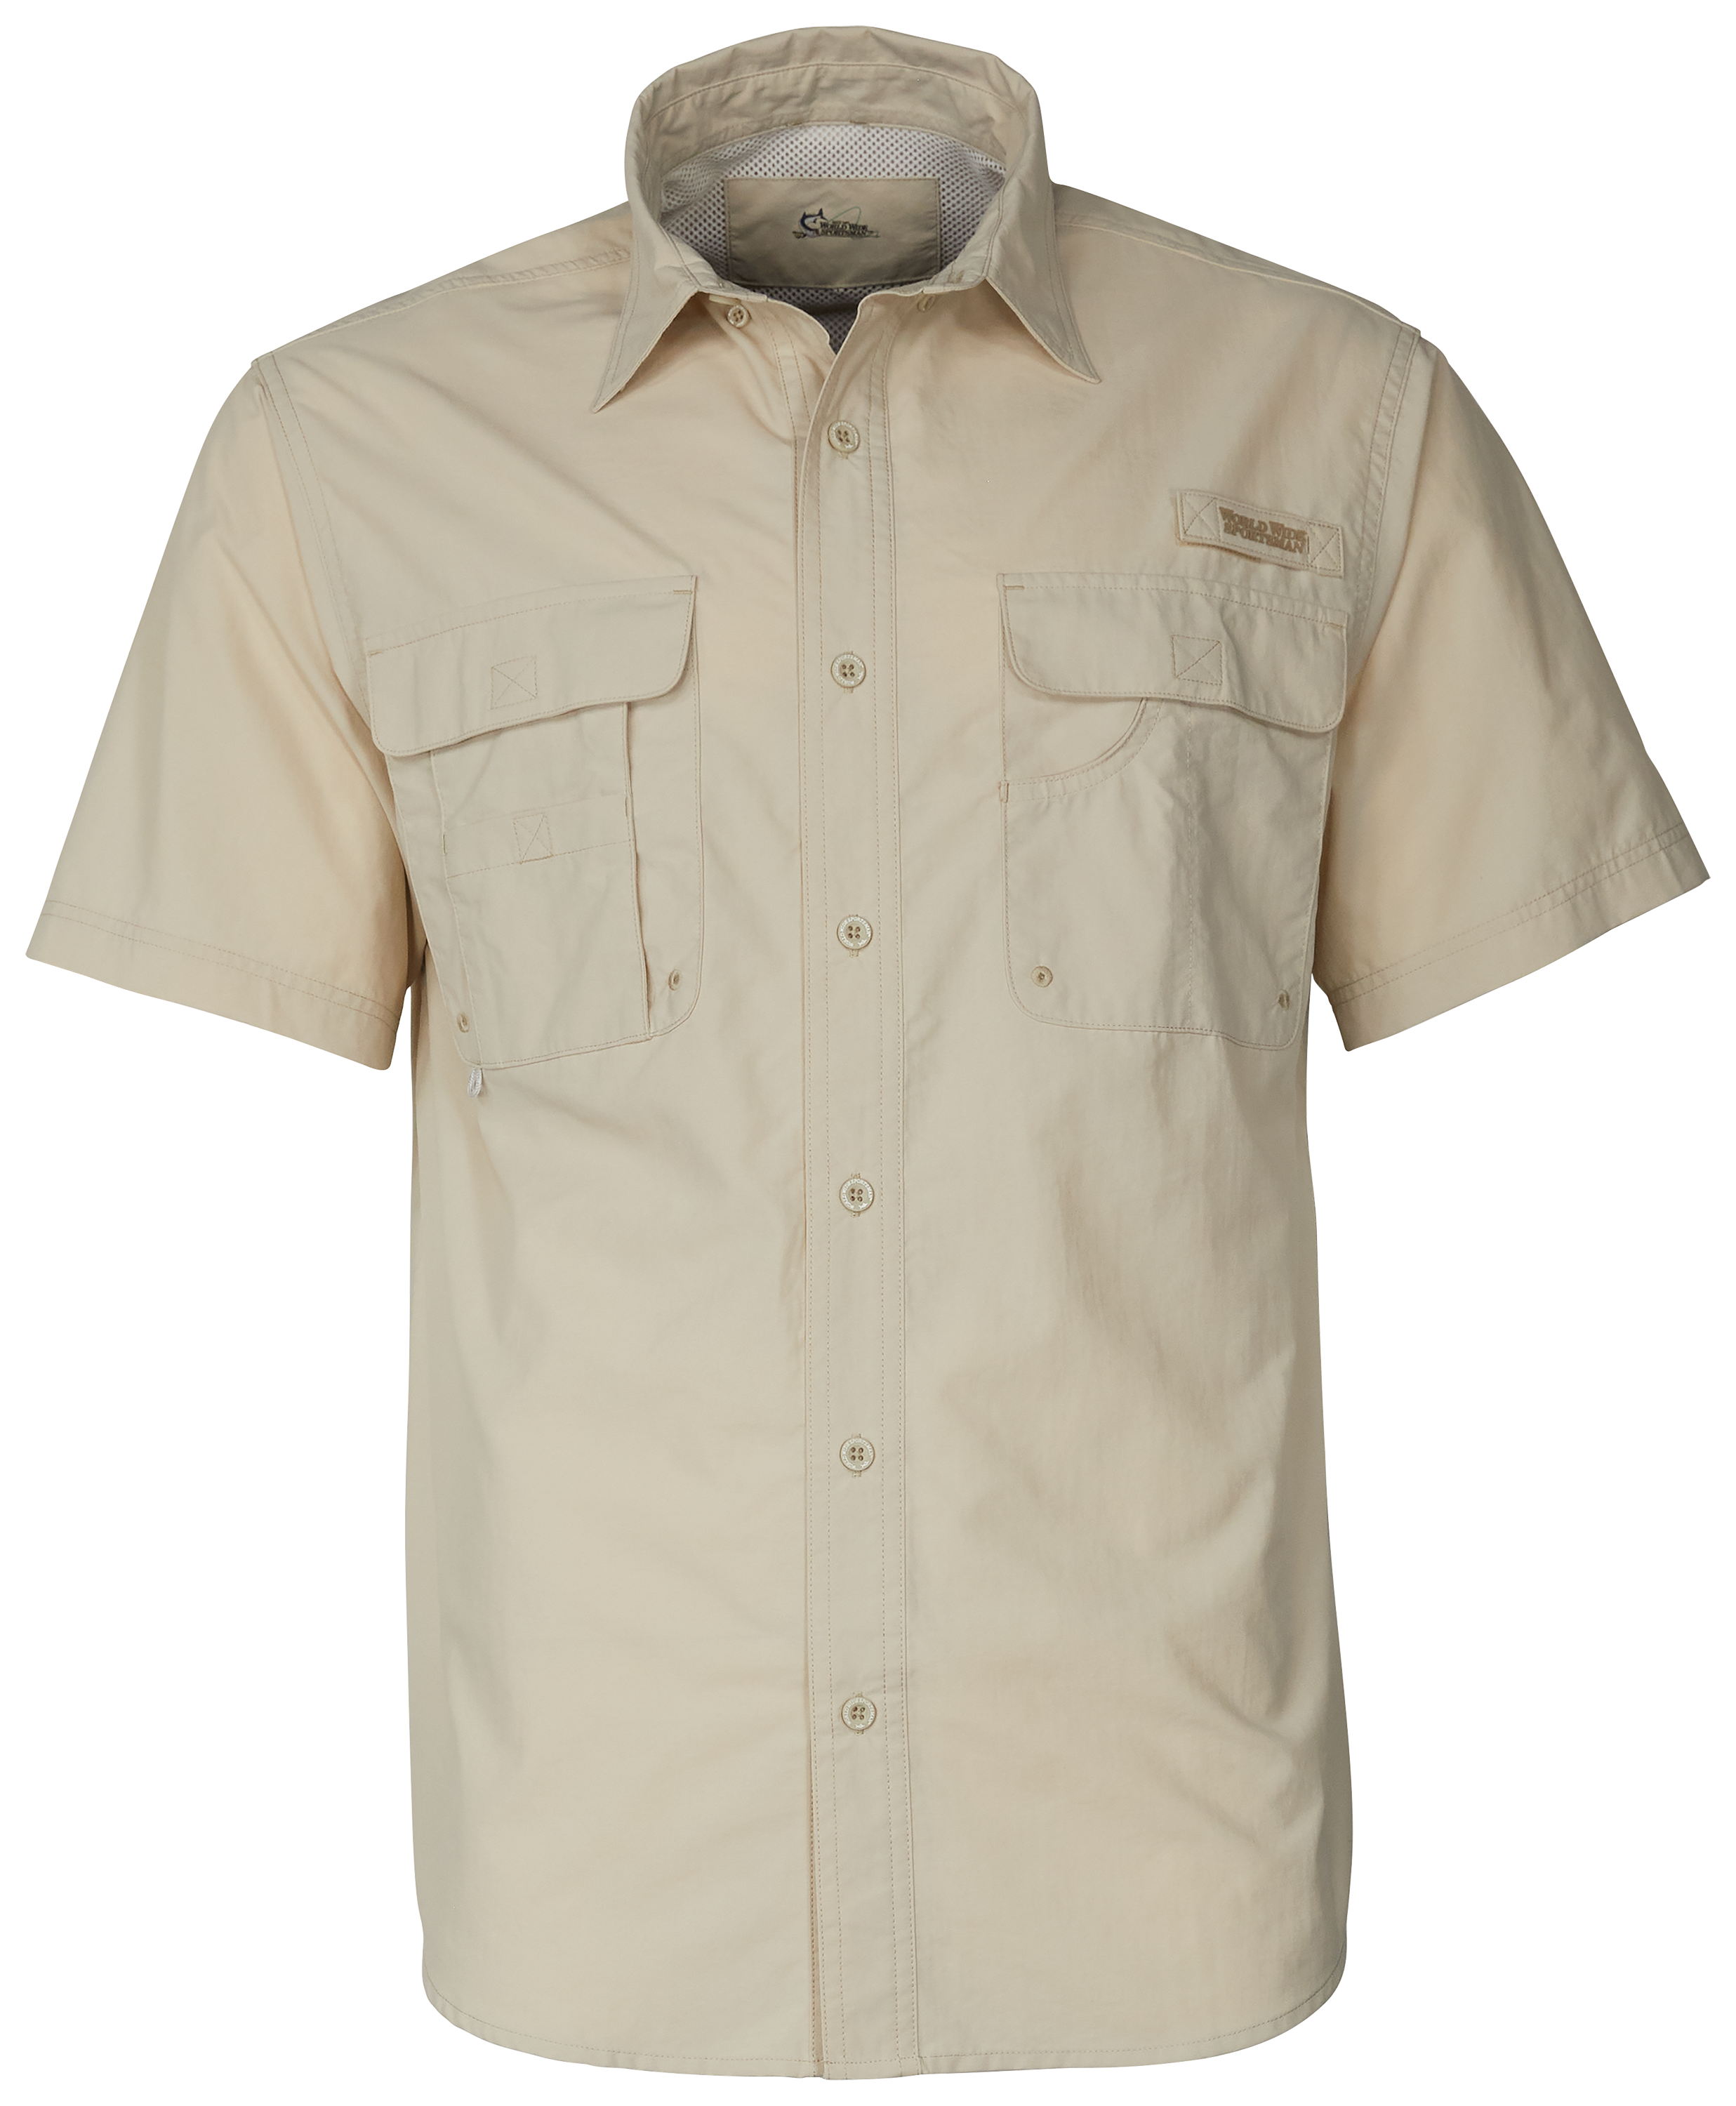 World Wide Sportsman Recycled-Nylon Angler 2.0 Short-Sleeve Button-Down Shirt for Men - Peyote - 4XL